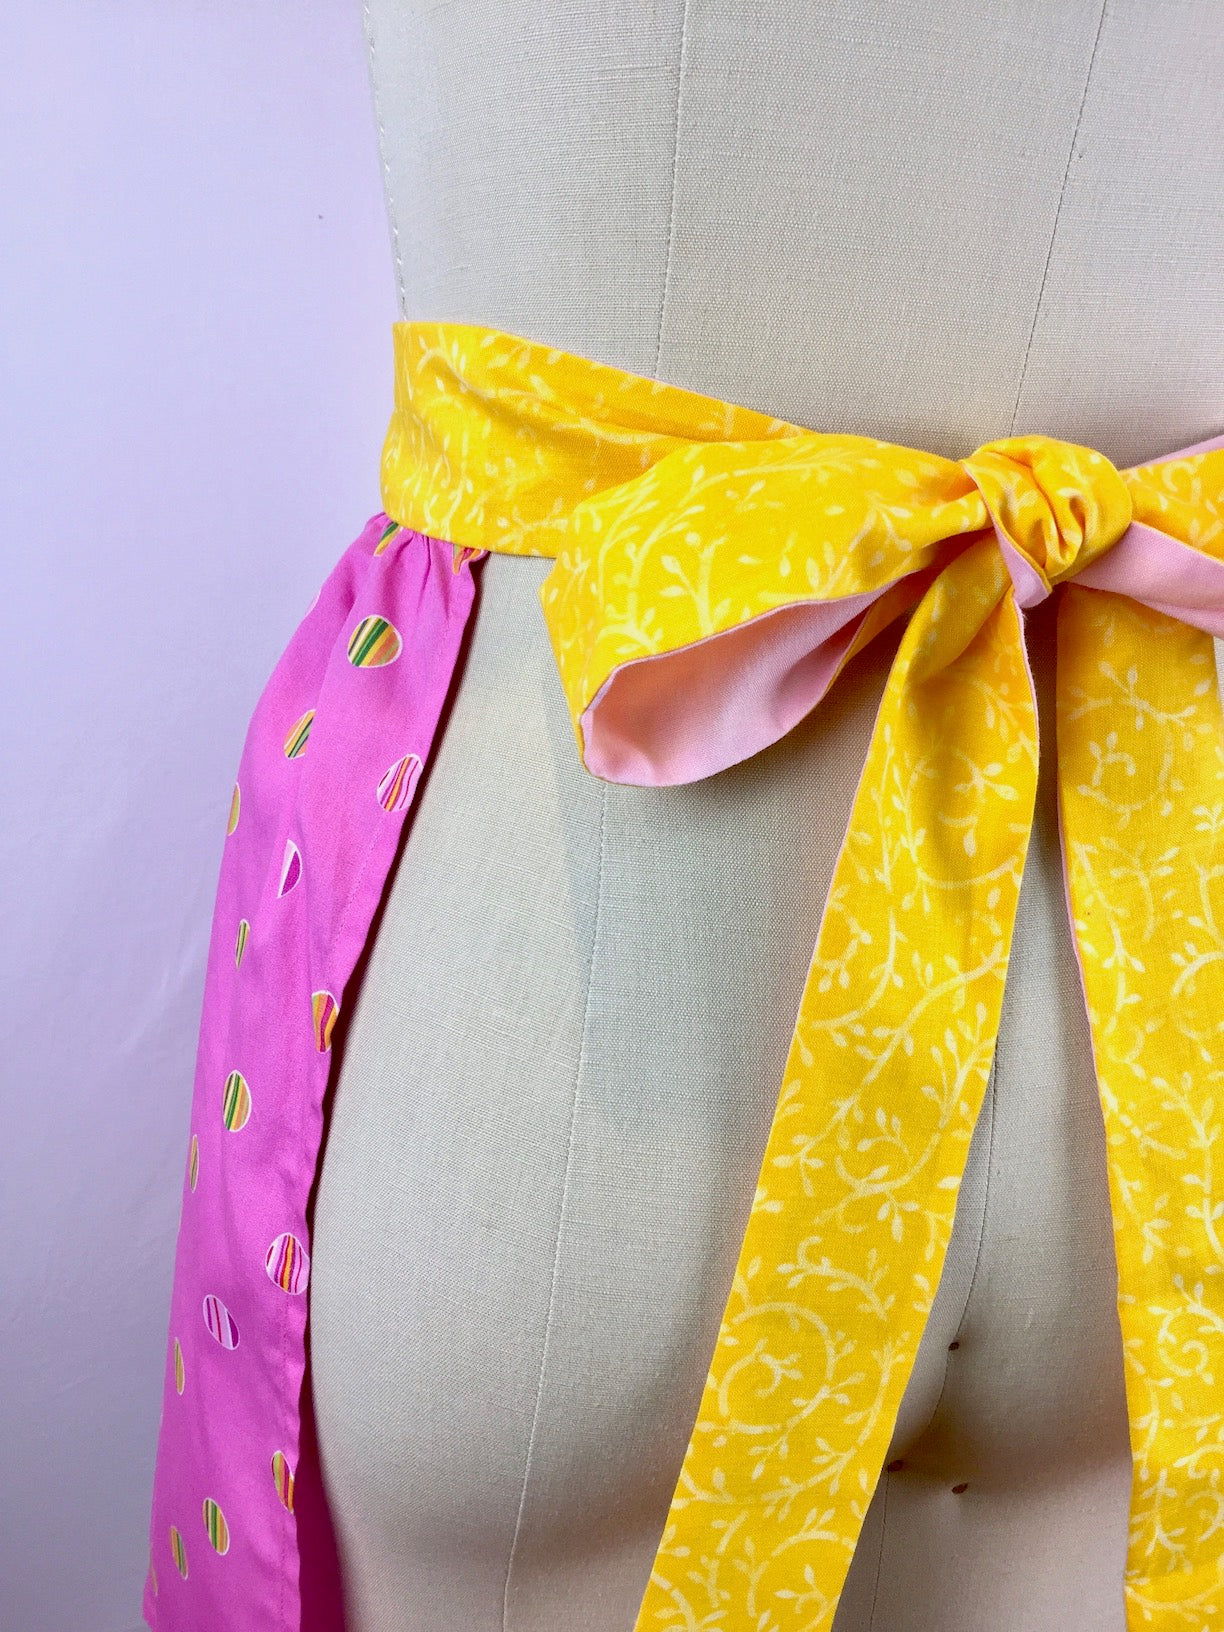 Pretty in Pink Apron-The Blue Peony-Age Group_Adult,Apron Style_Vintage Feminine,Category_Apron,Color_Pink,Color_Yellow,Department_Kitchen,Material_Cotton,Pattern_Polka Dot,Pattern_Stripes